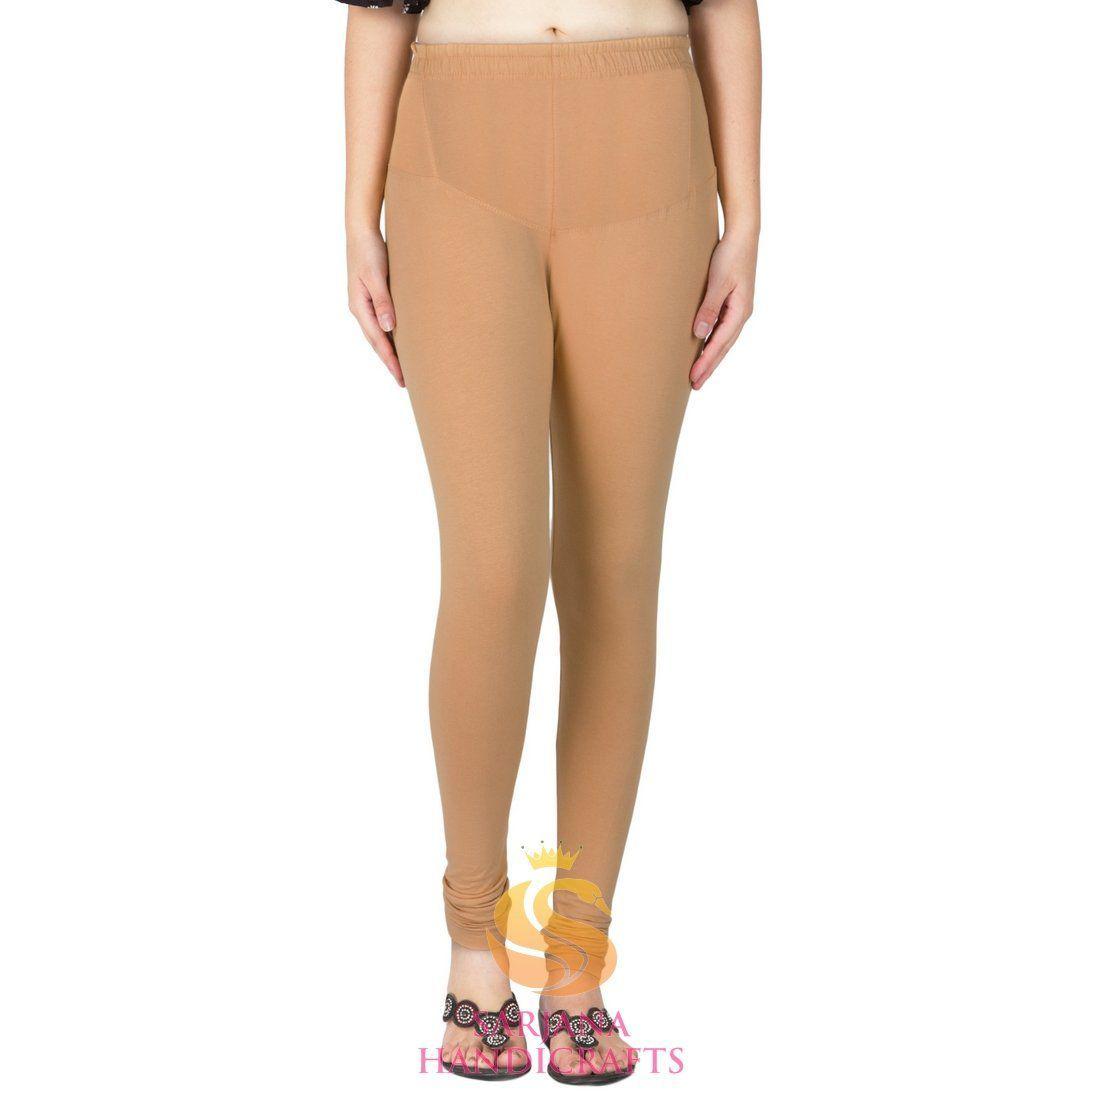 Brand New Cotton Jeans Pants in Skin Color for Best Wearing